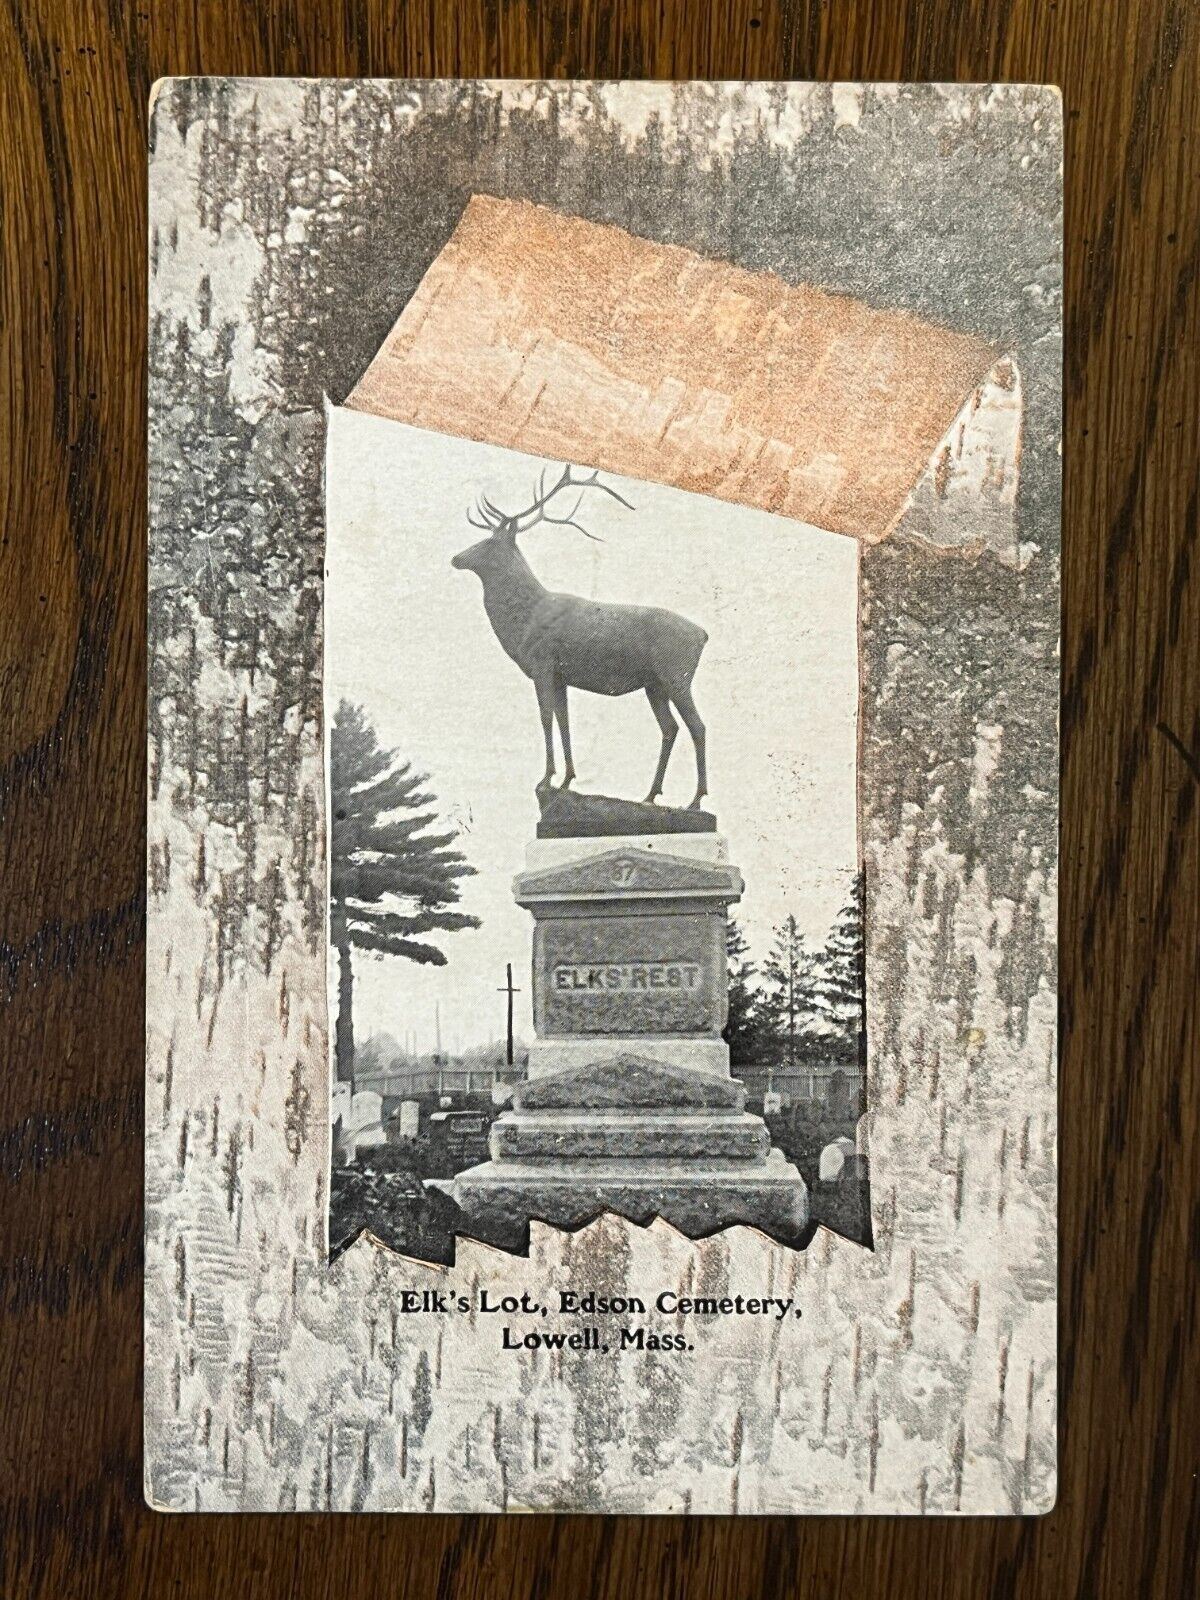 ANTIQUE POSTCARD  ELK\'S LOT  EDSON CEMETERY LOWELL, MASS  POSTED OCT 25, 1907